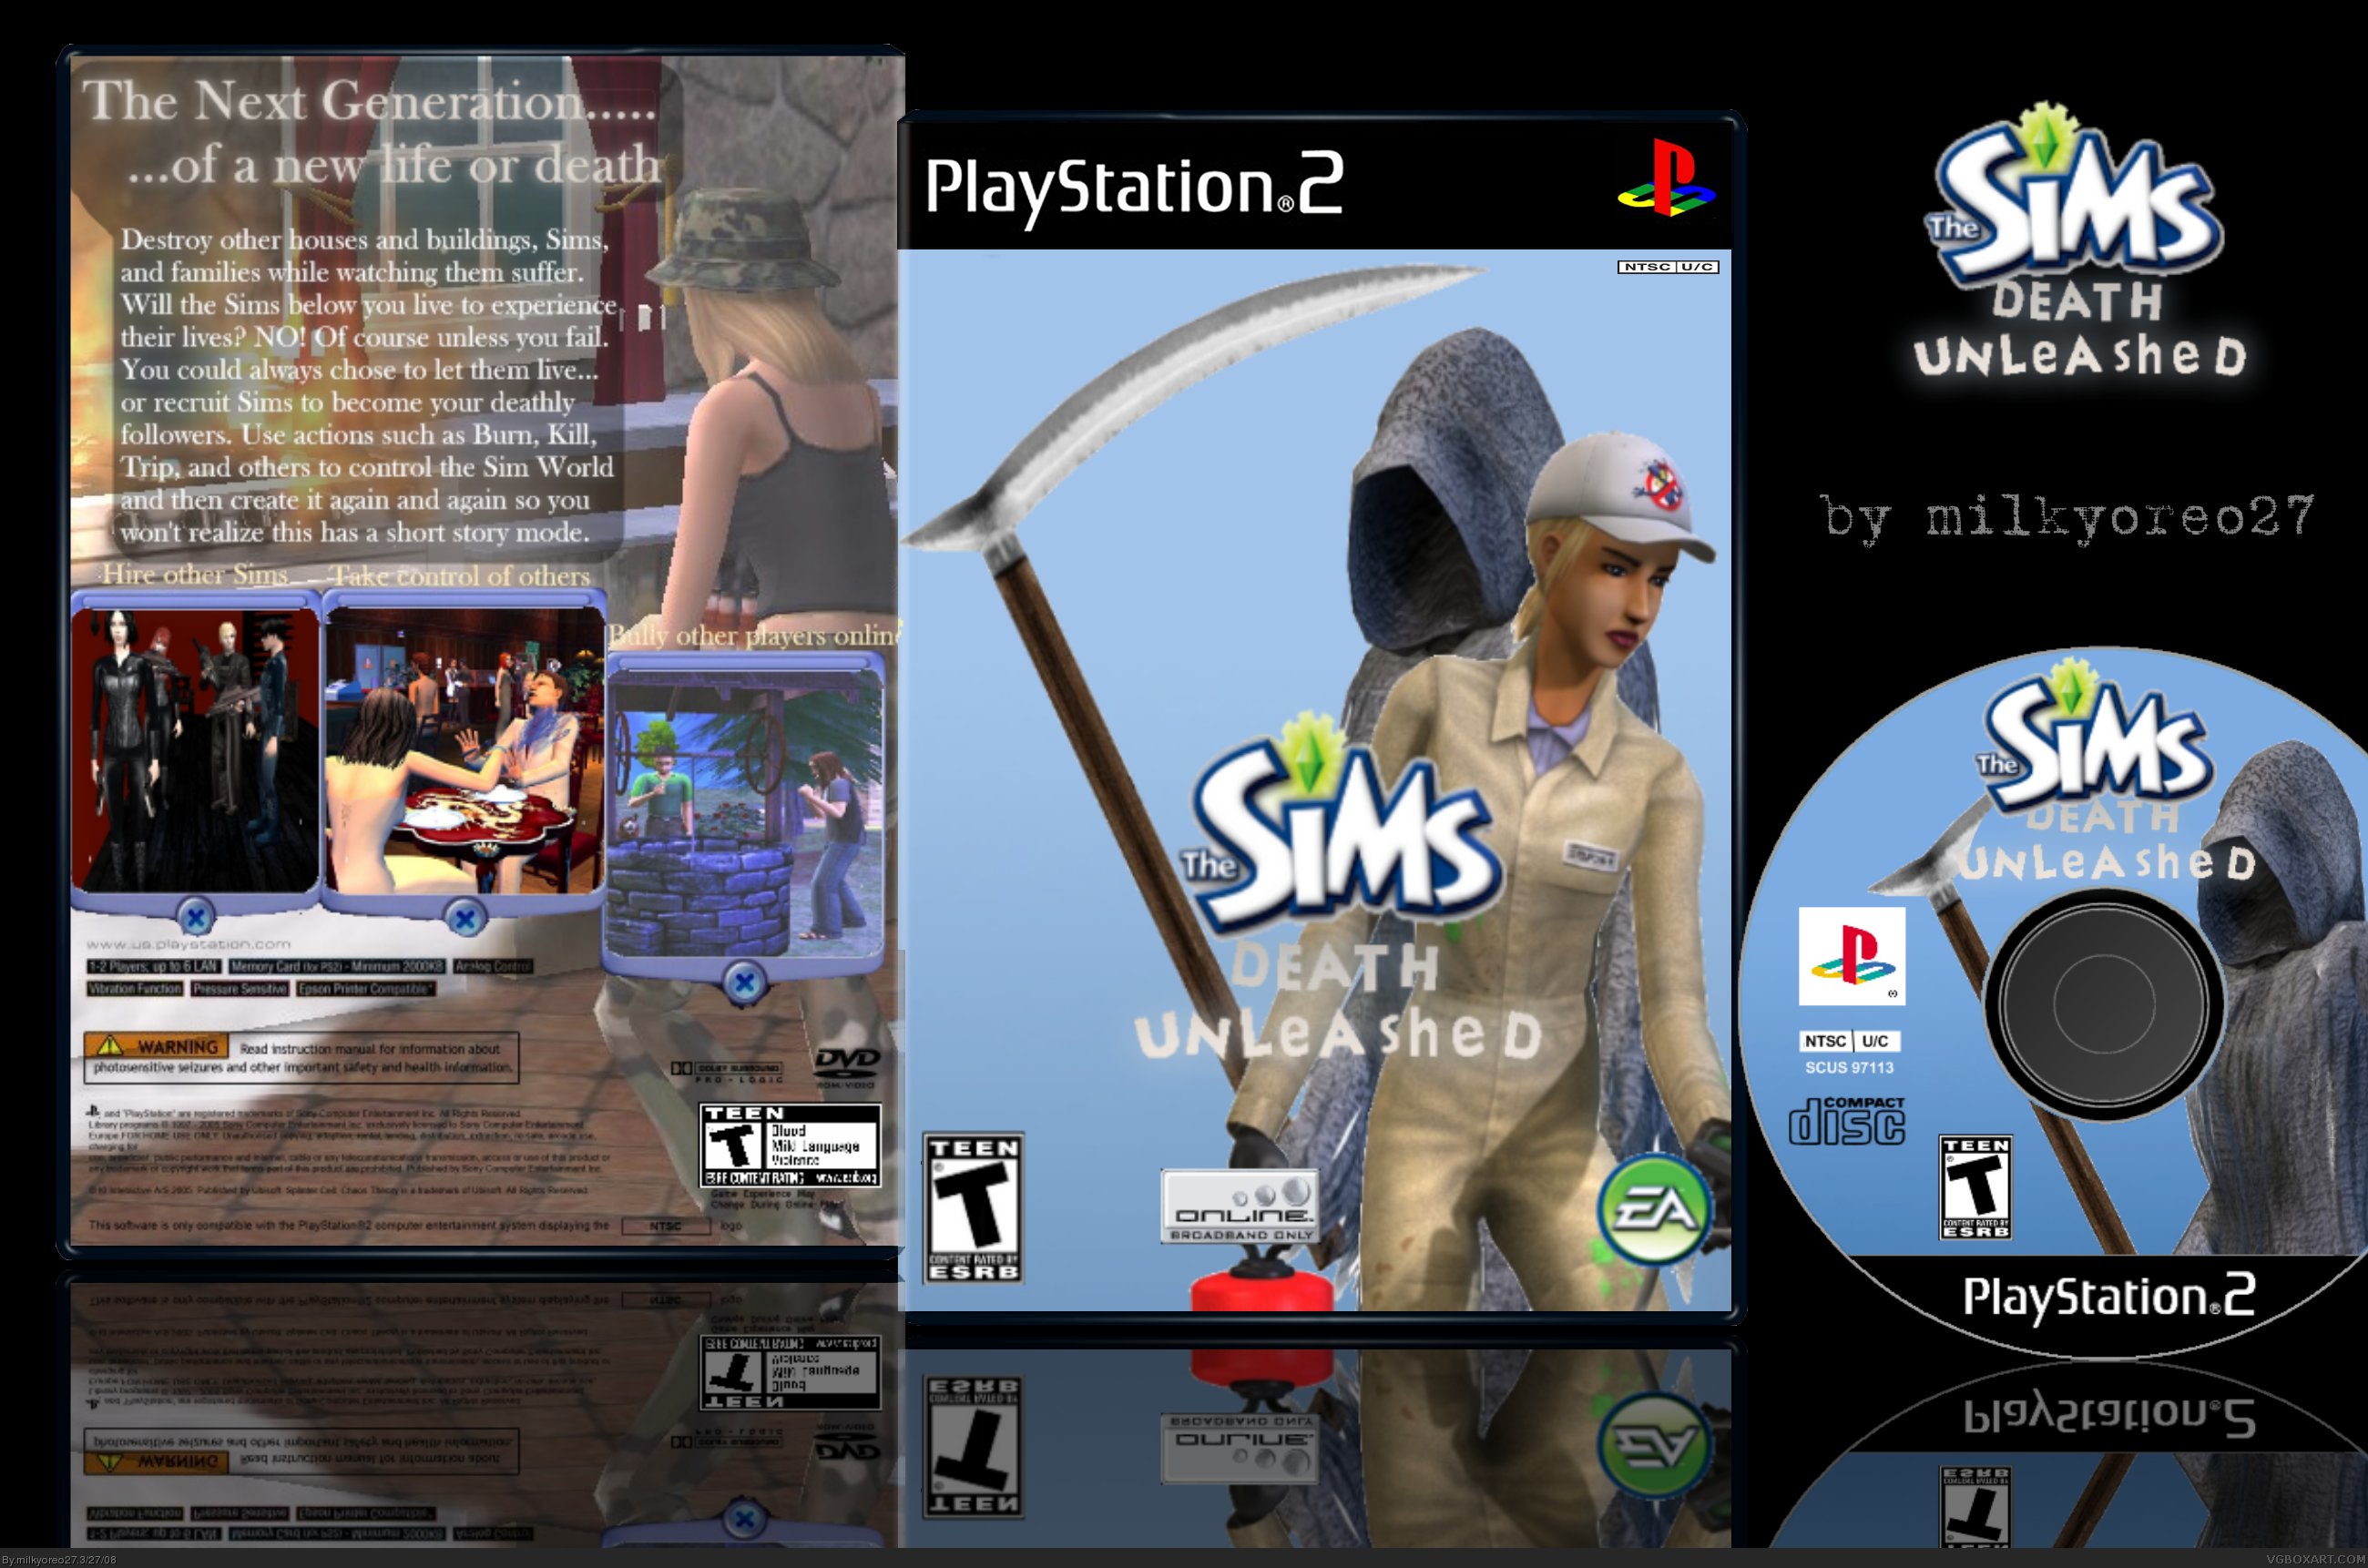 The Sims - Death Unleashed box cover